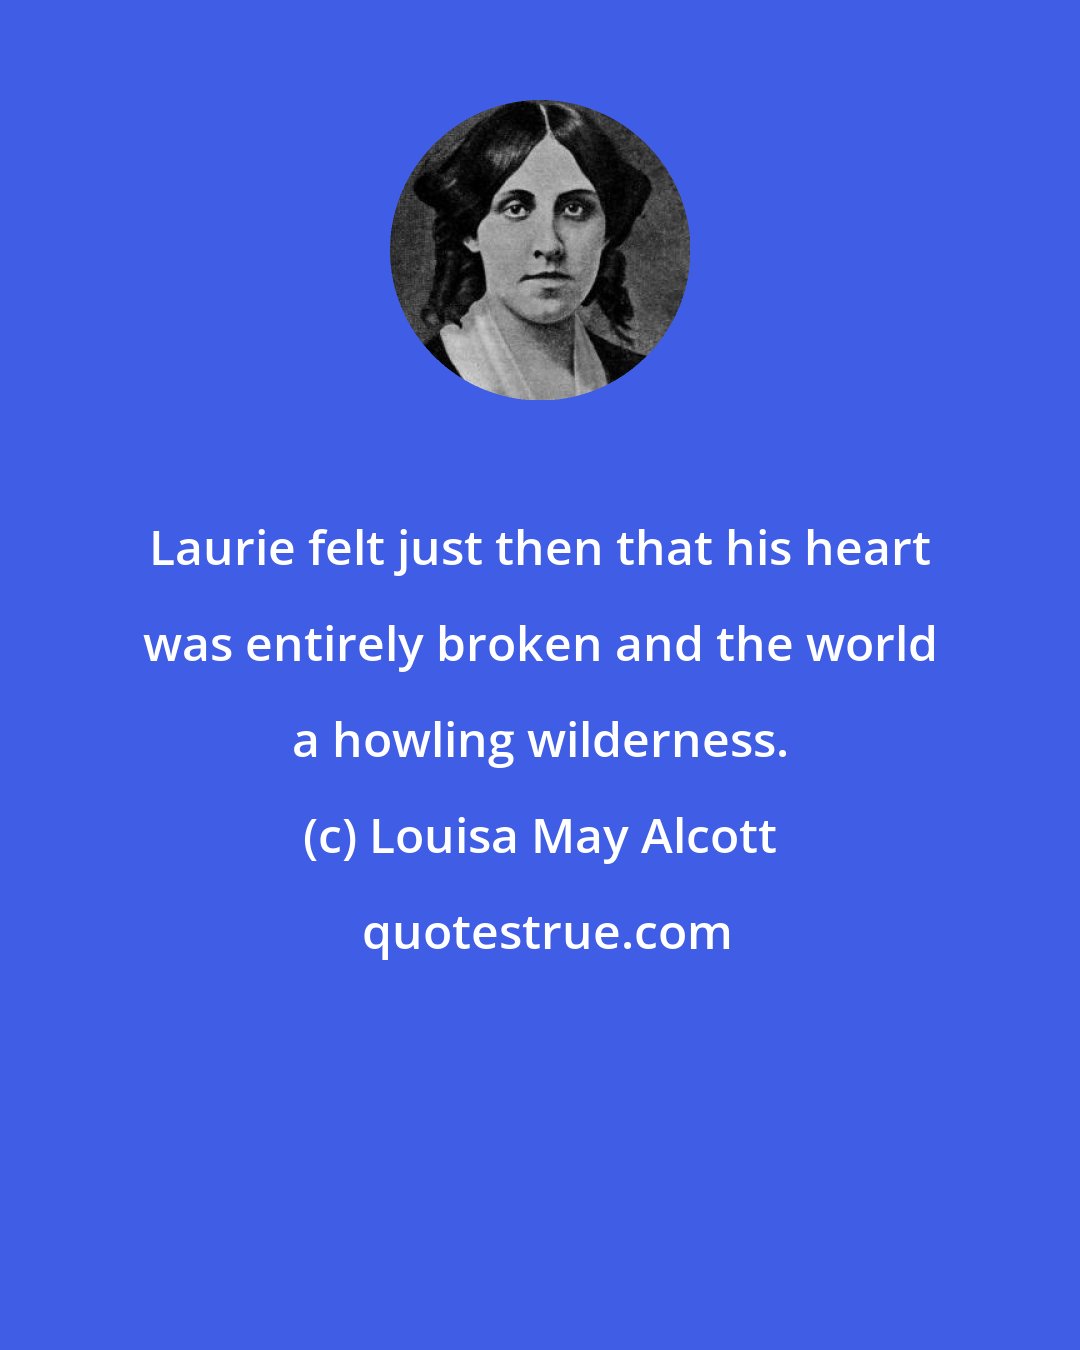 Louisa May Alcott: Laurie felt just then that his heart was entirely broken and the world a howling wilderness.